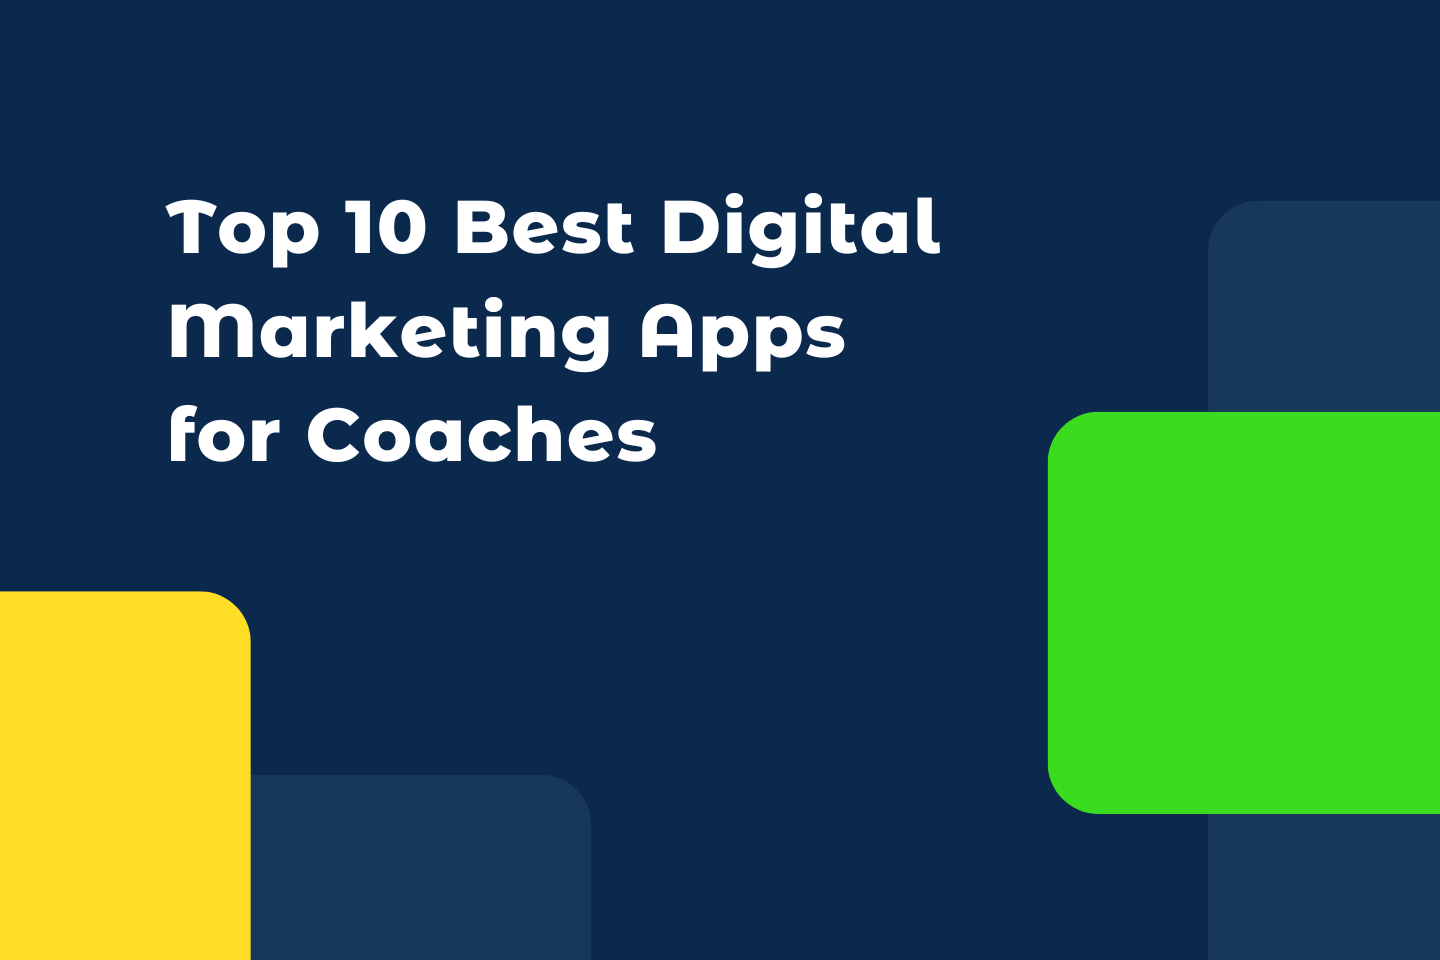 Top 10 Best Digital Marketing Apps for Coaches